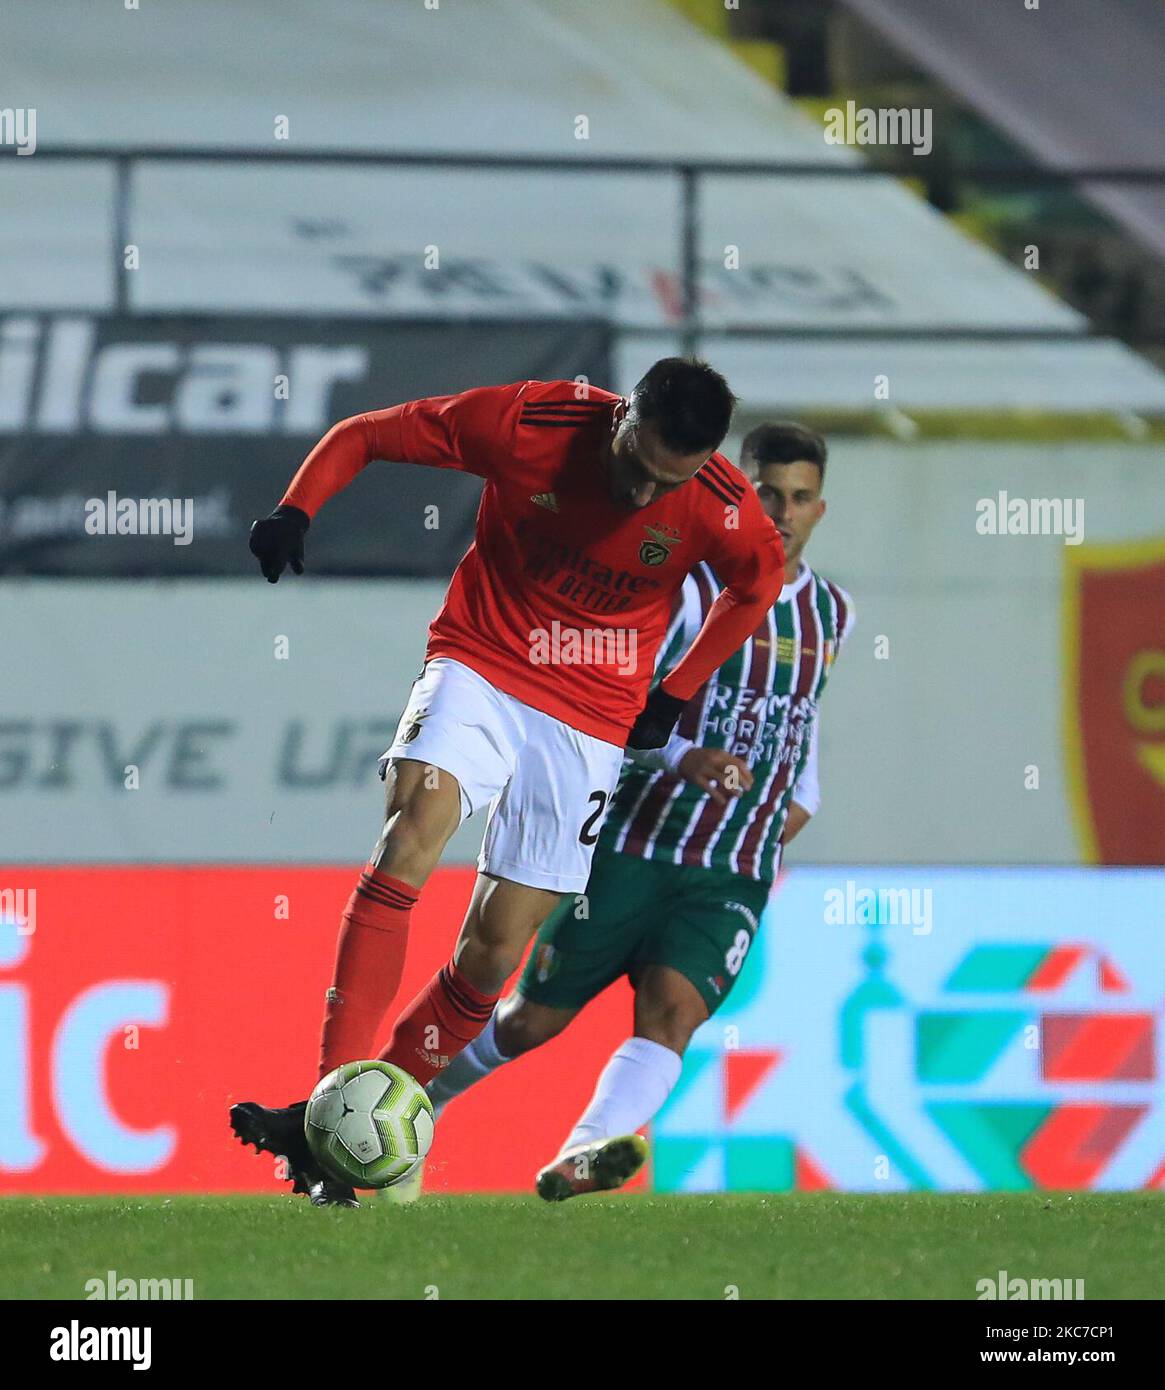 Andreas Samaris of SL Benfica in action during the Portuguese Cup match between Club Football Estrela da Amadora and SL Benfica at Estadio Jose Gomes on January 12, 2021 in Amadora, Portugal. (Photo by Paulo Nascimento/NurPhoto) Stock Photo